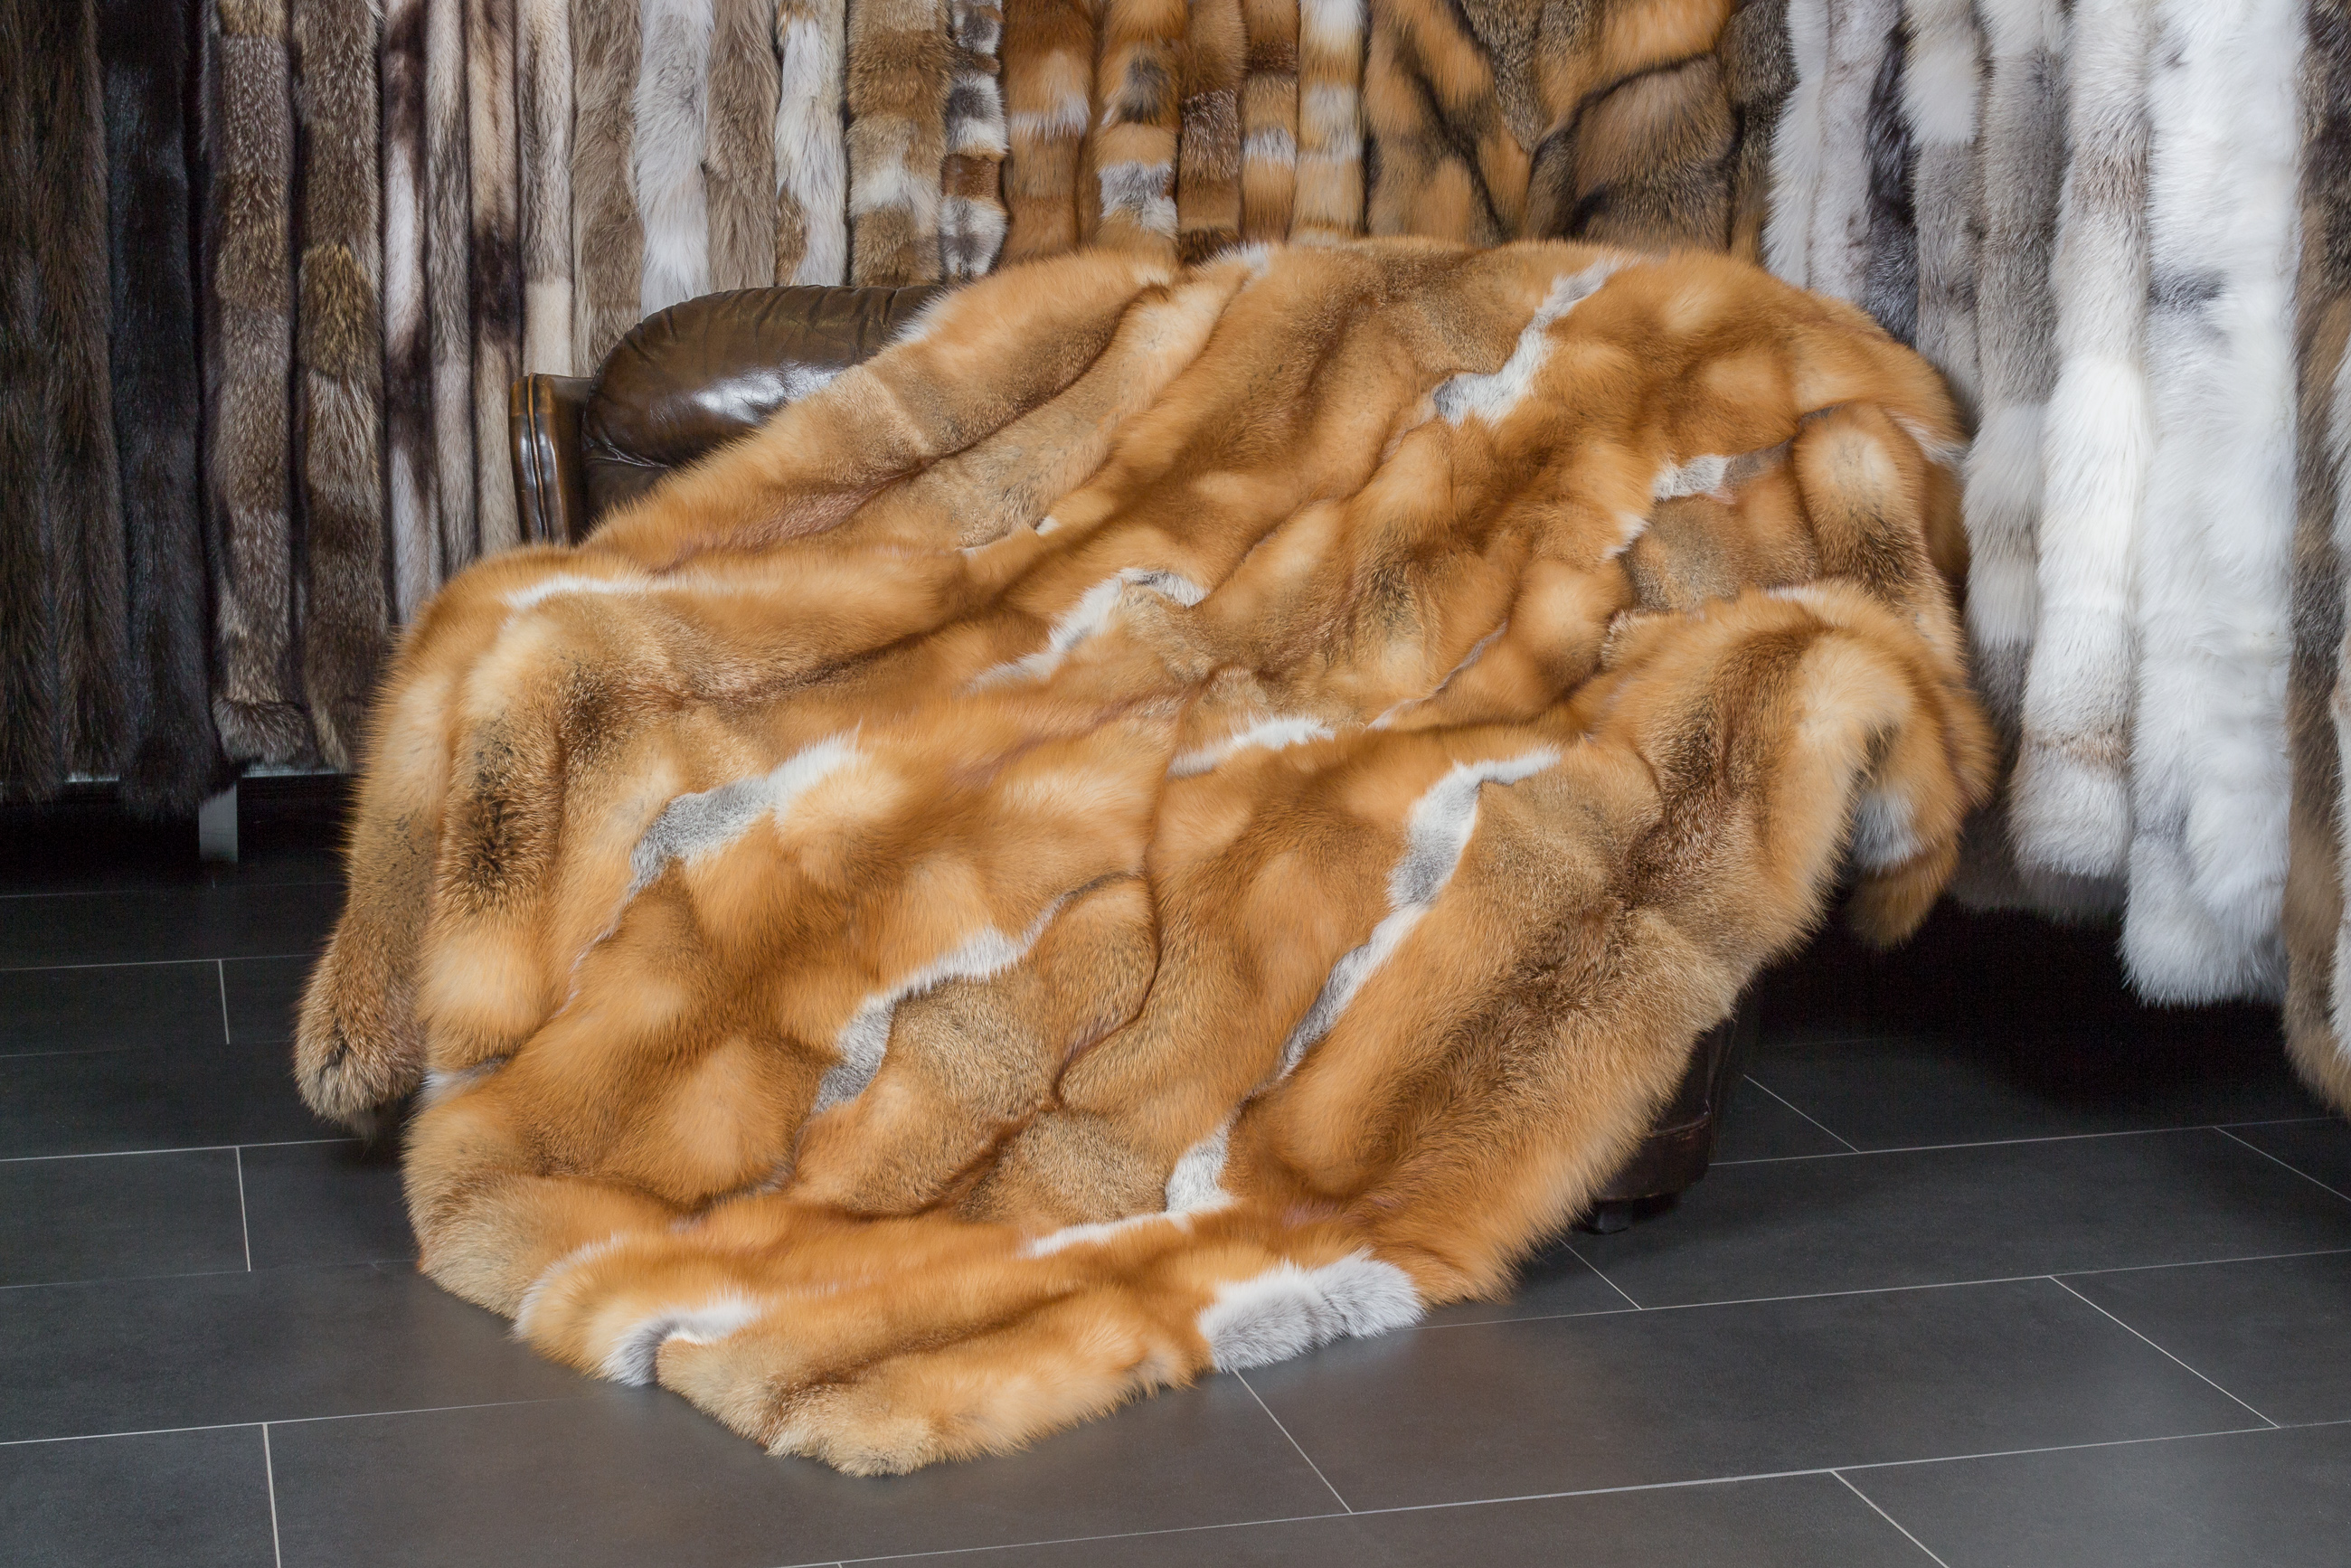 Canadian red fox fur blanket - classic style